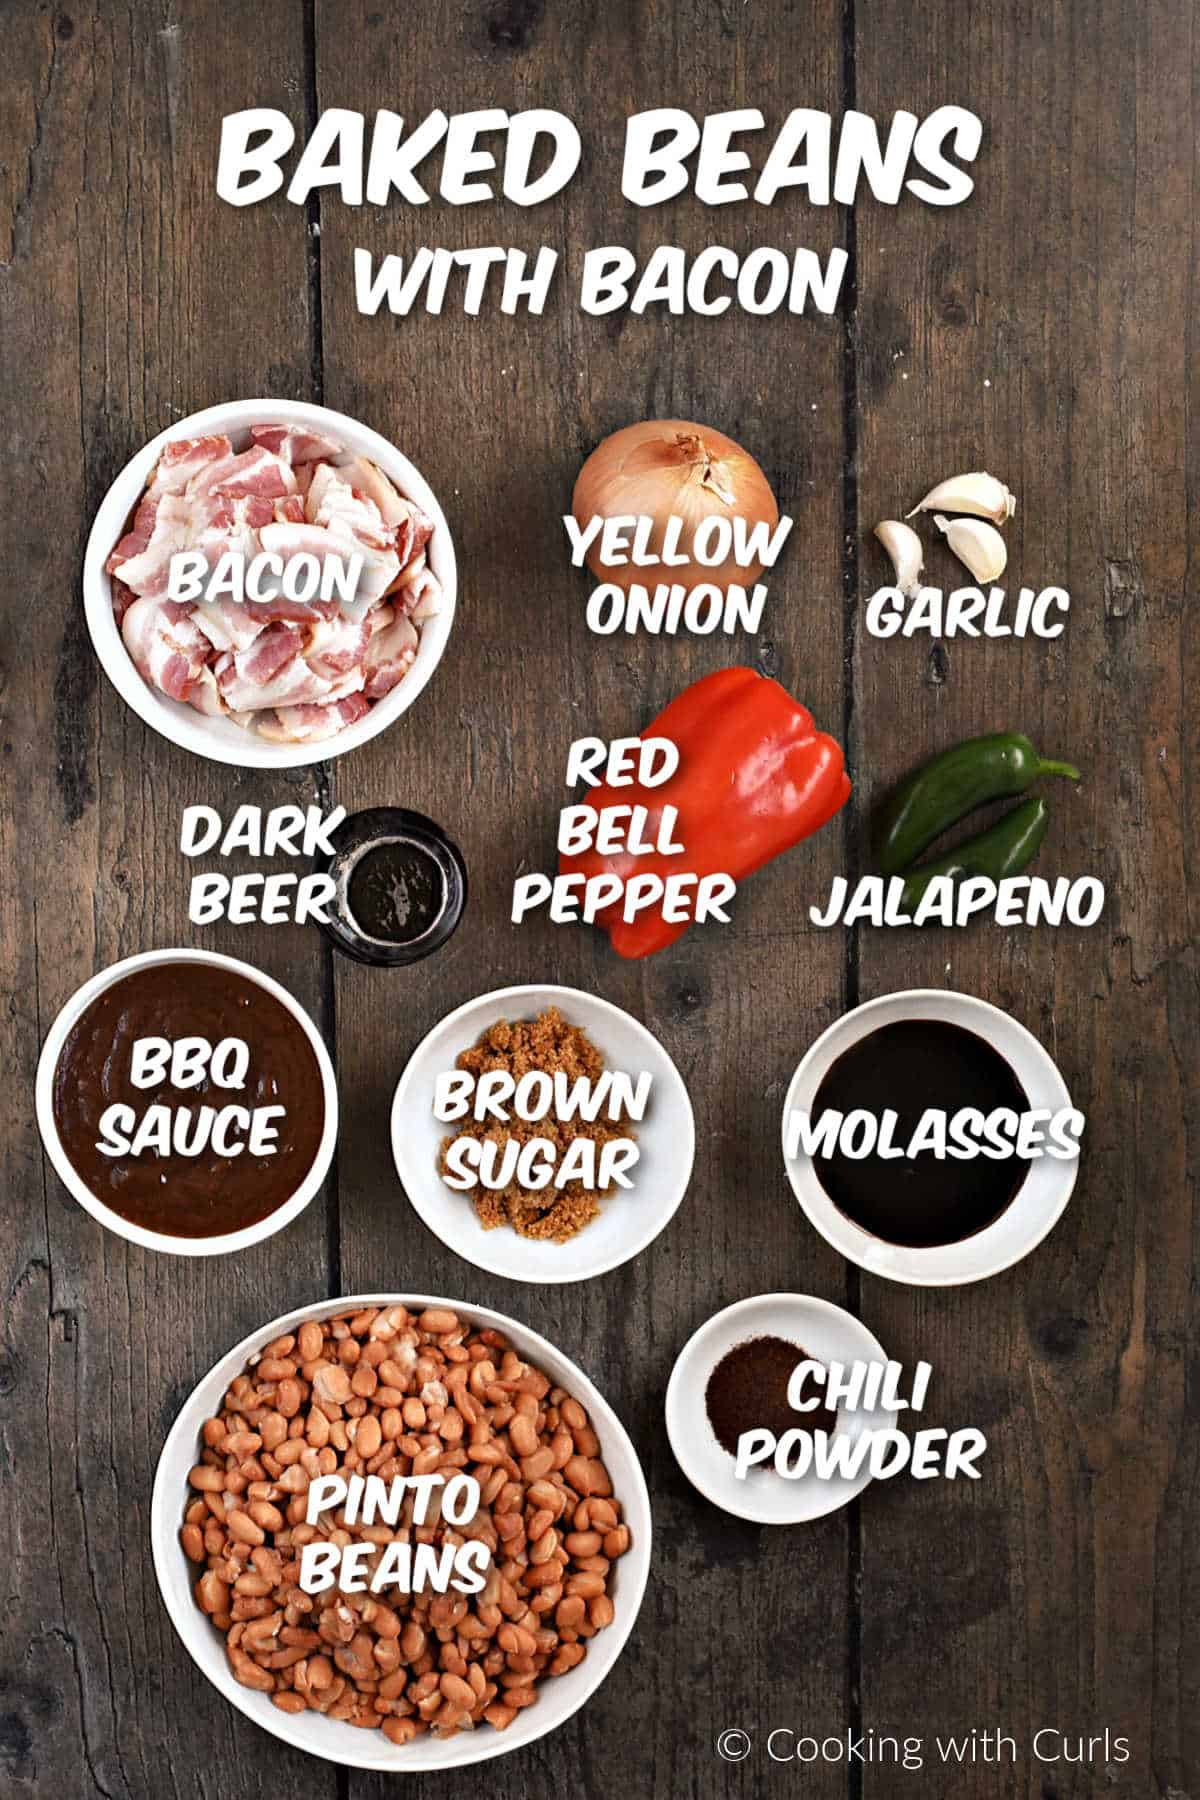 Ingredients needed to make baked beans with bacon.